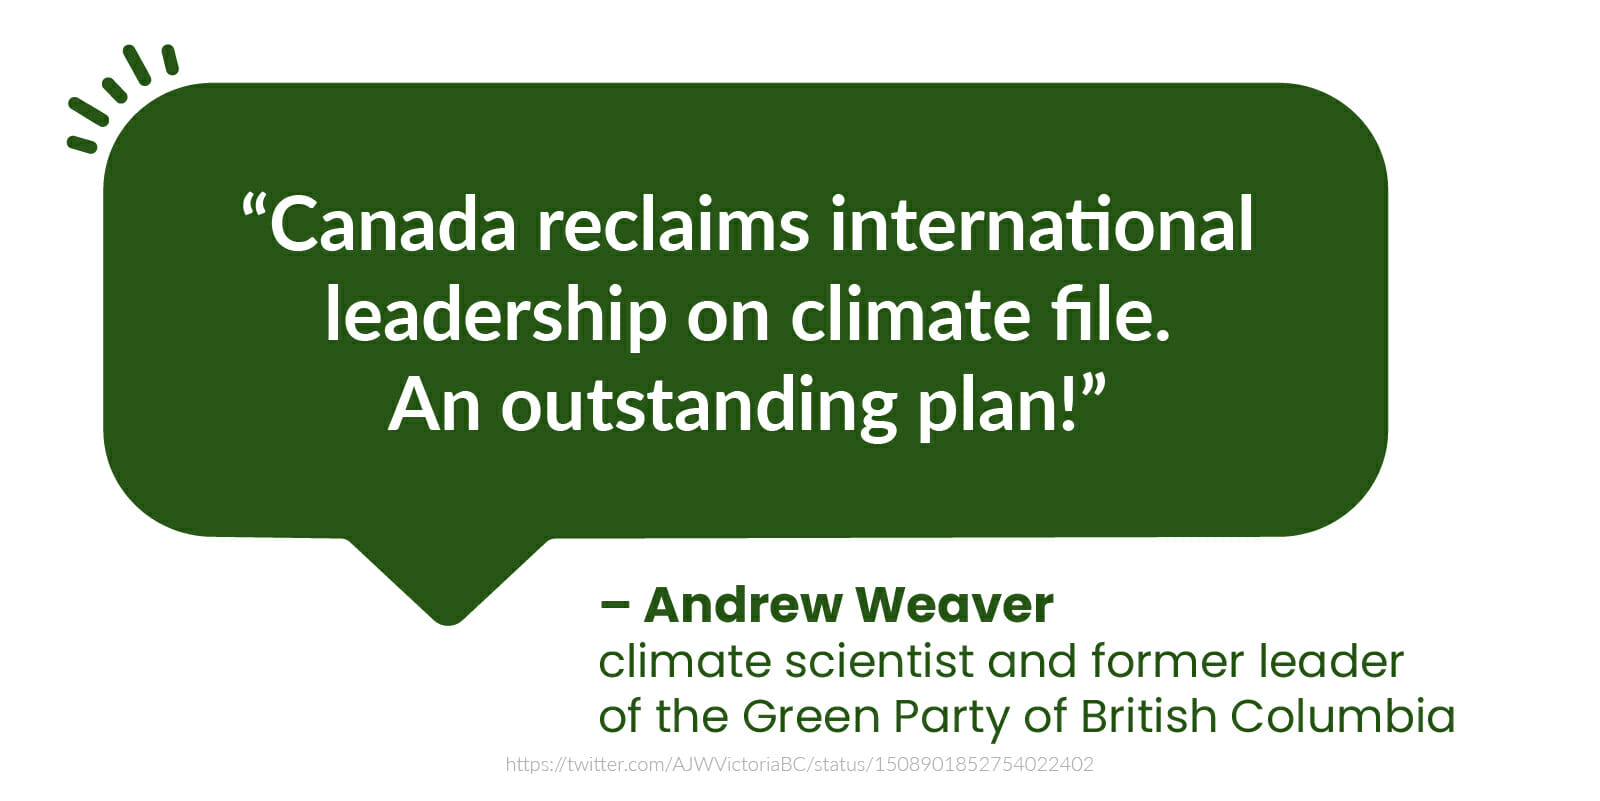  “Canada reclaims international leadership on climate file. An outstanding plan!” - Andrew Weaver, Climate scientist and former leader of the Green Party of British Columbia